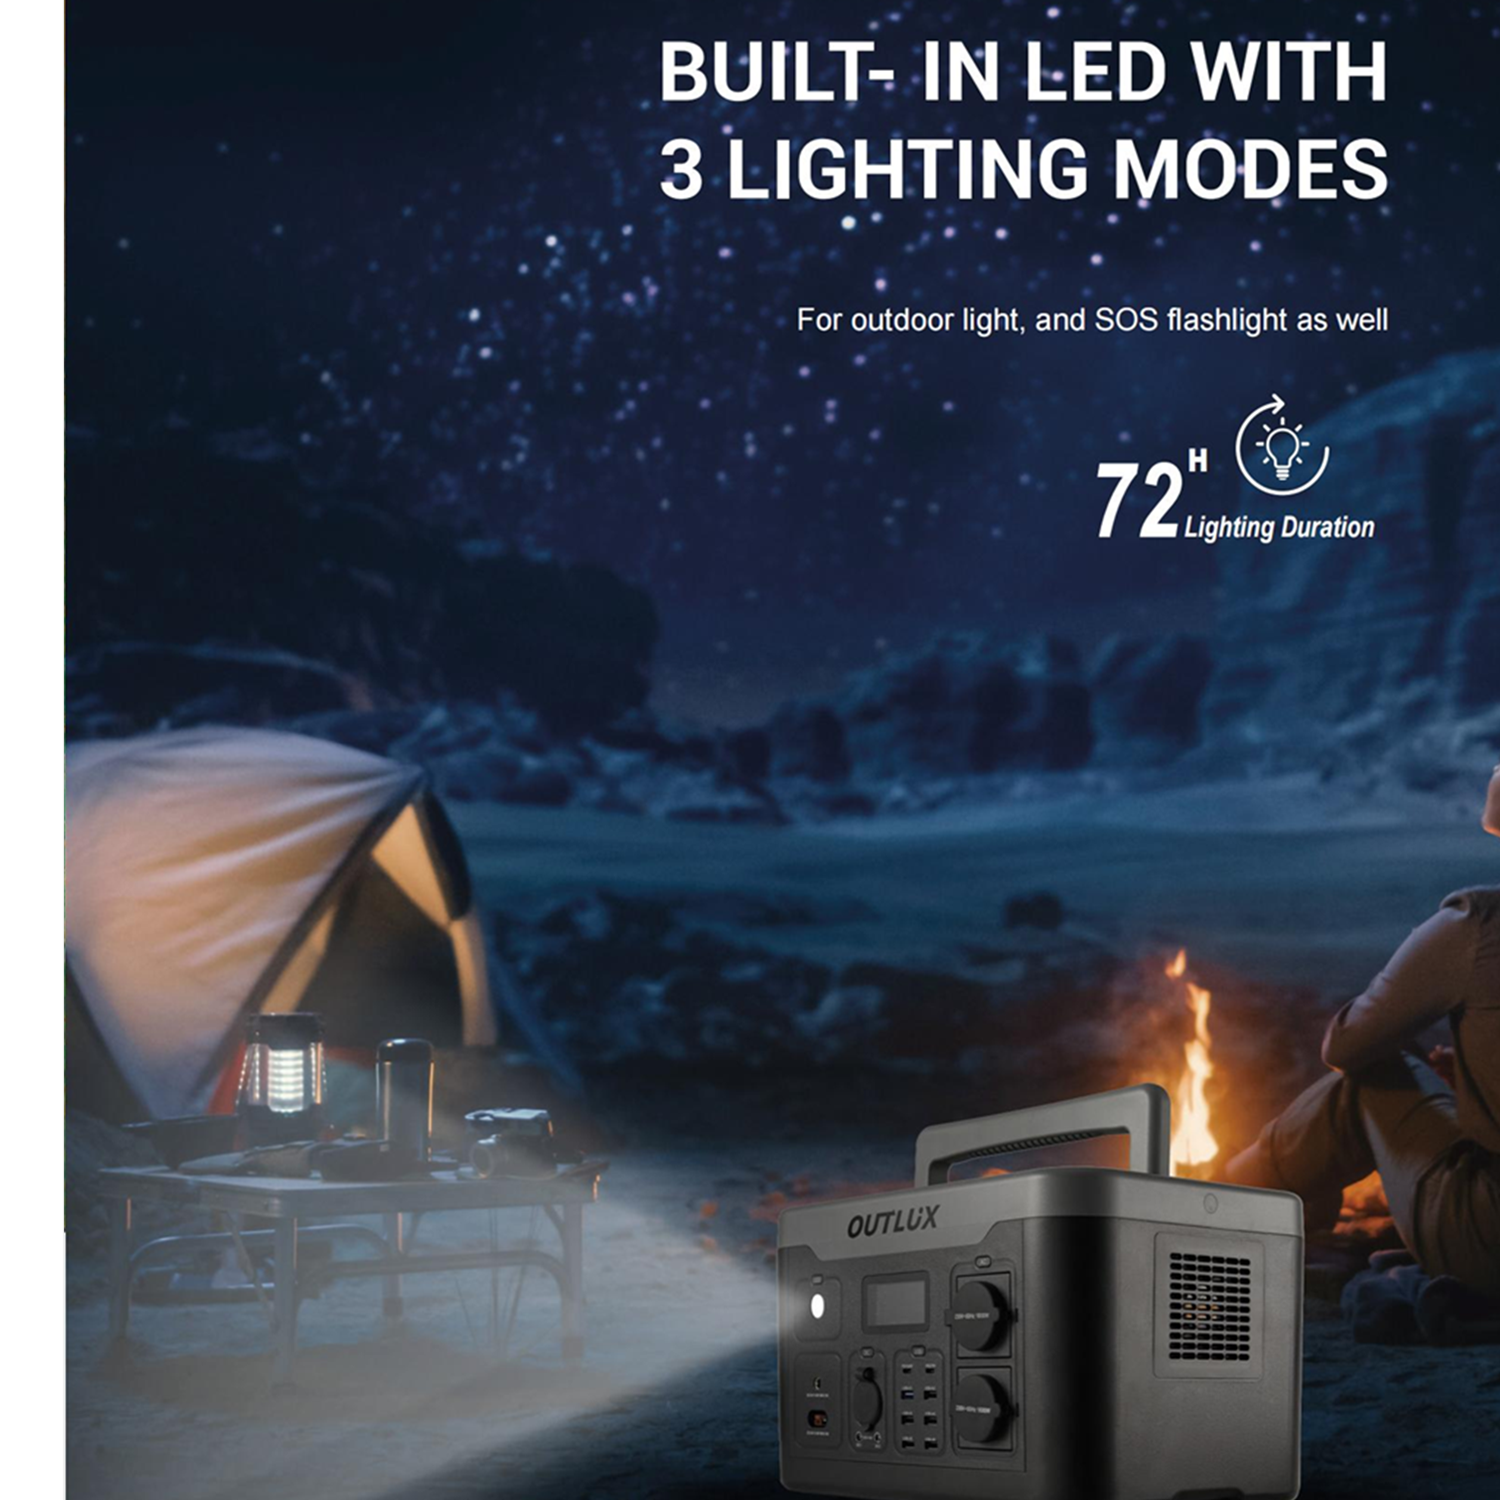 Outlux 1800w Portable Power Station-Multifunctional